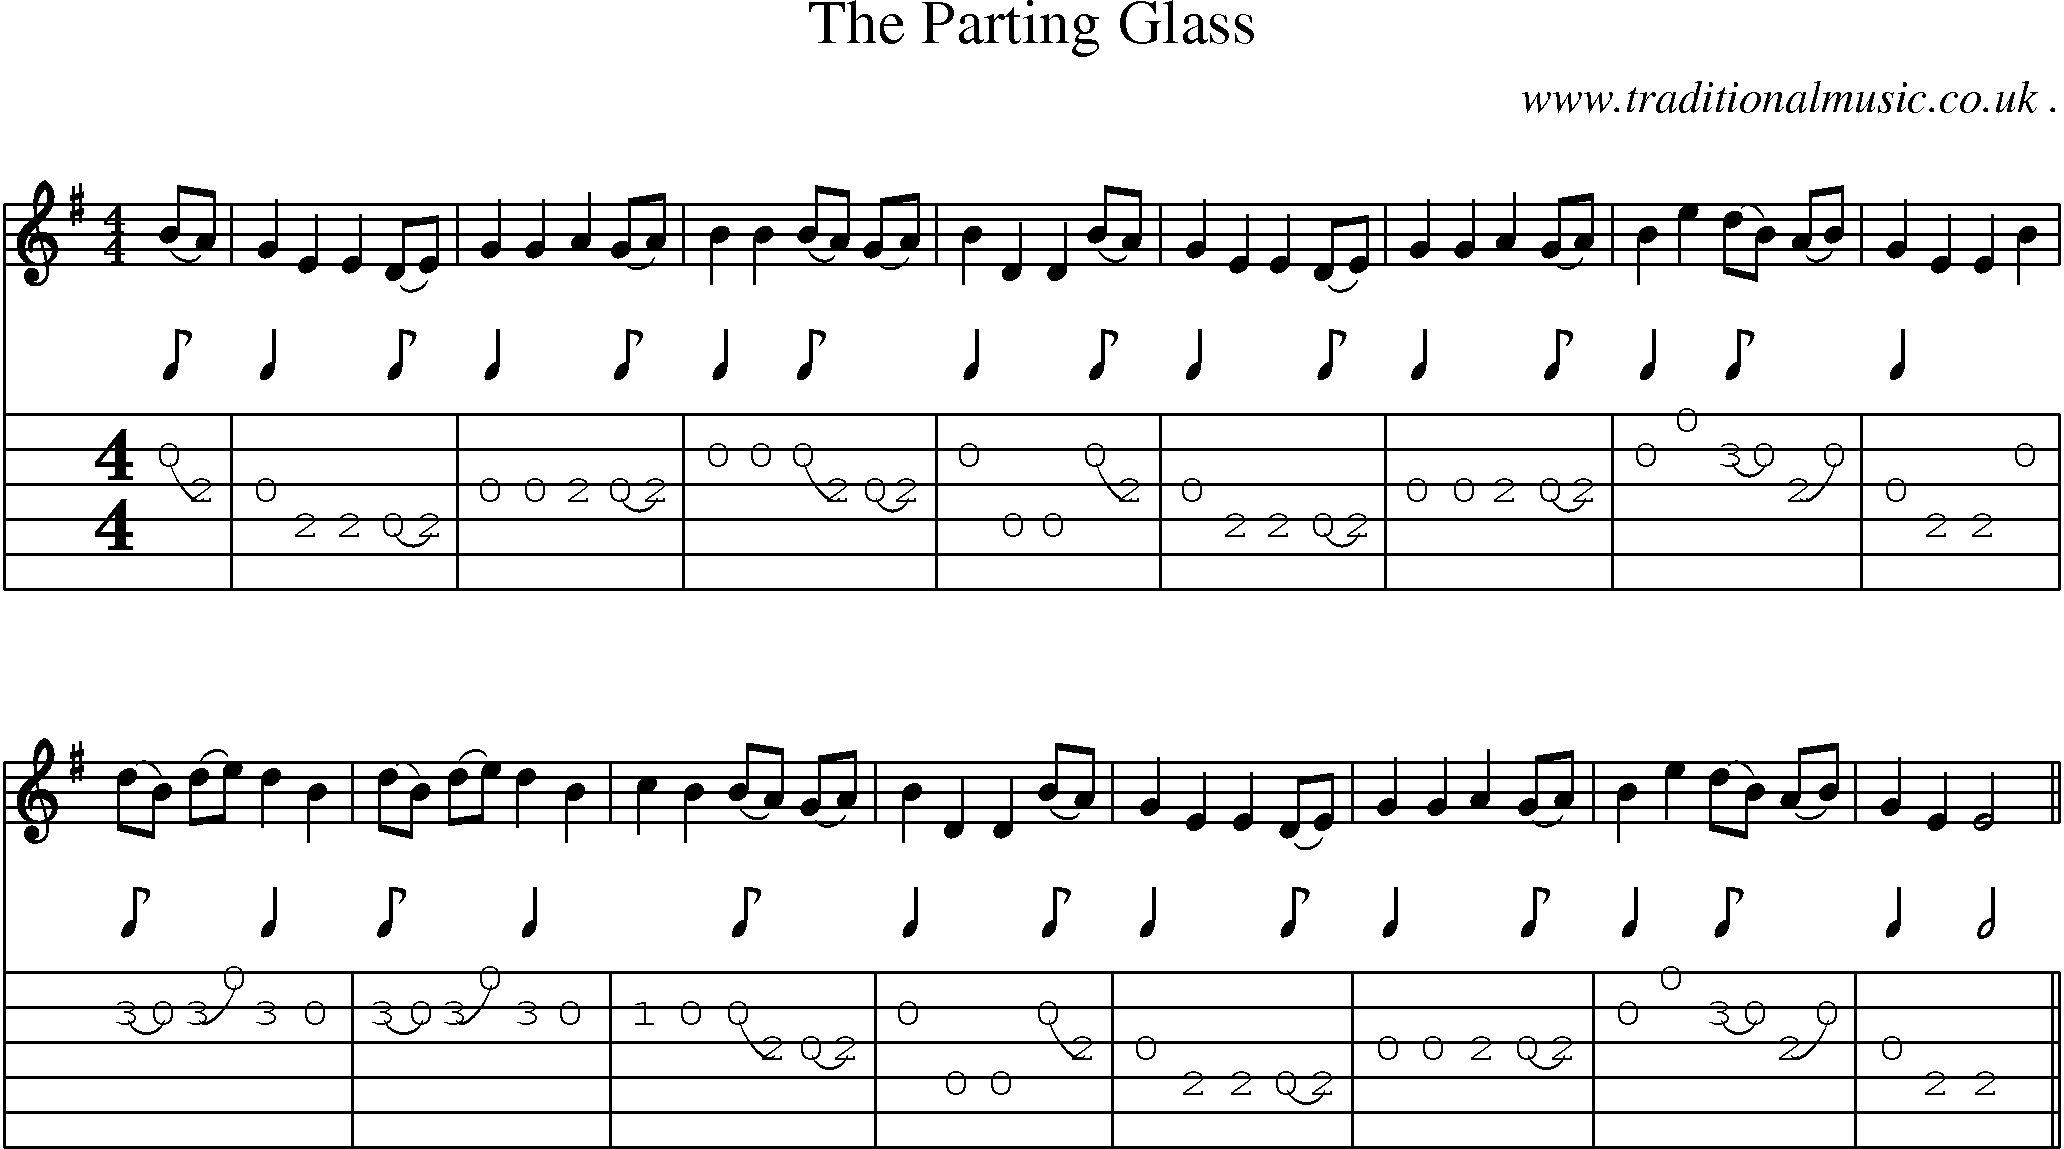 Sheet-Music and Guitar Tabs for The Parting Glass